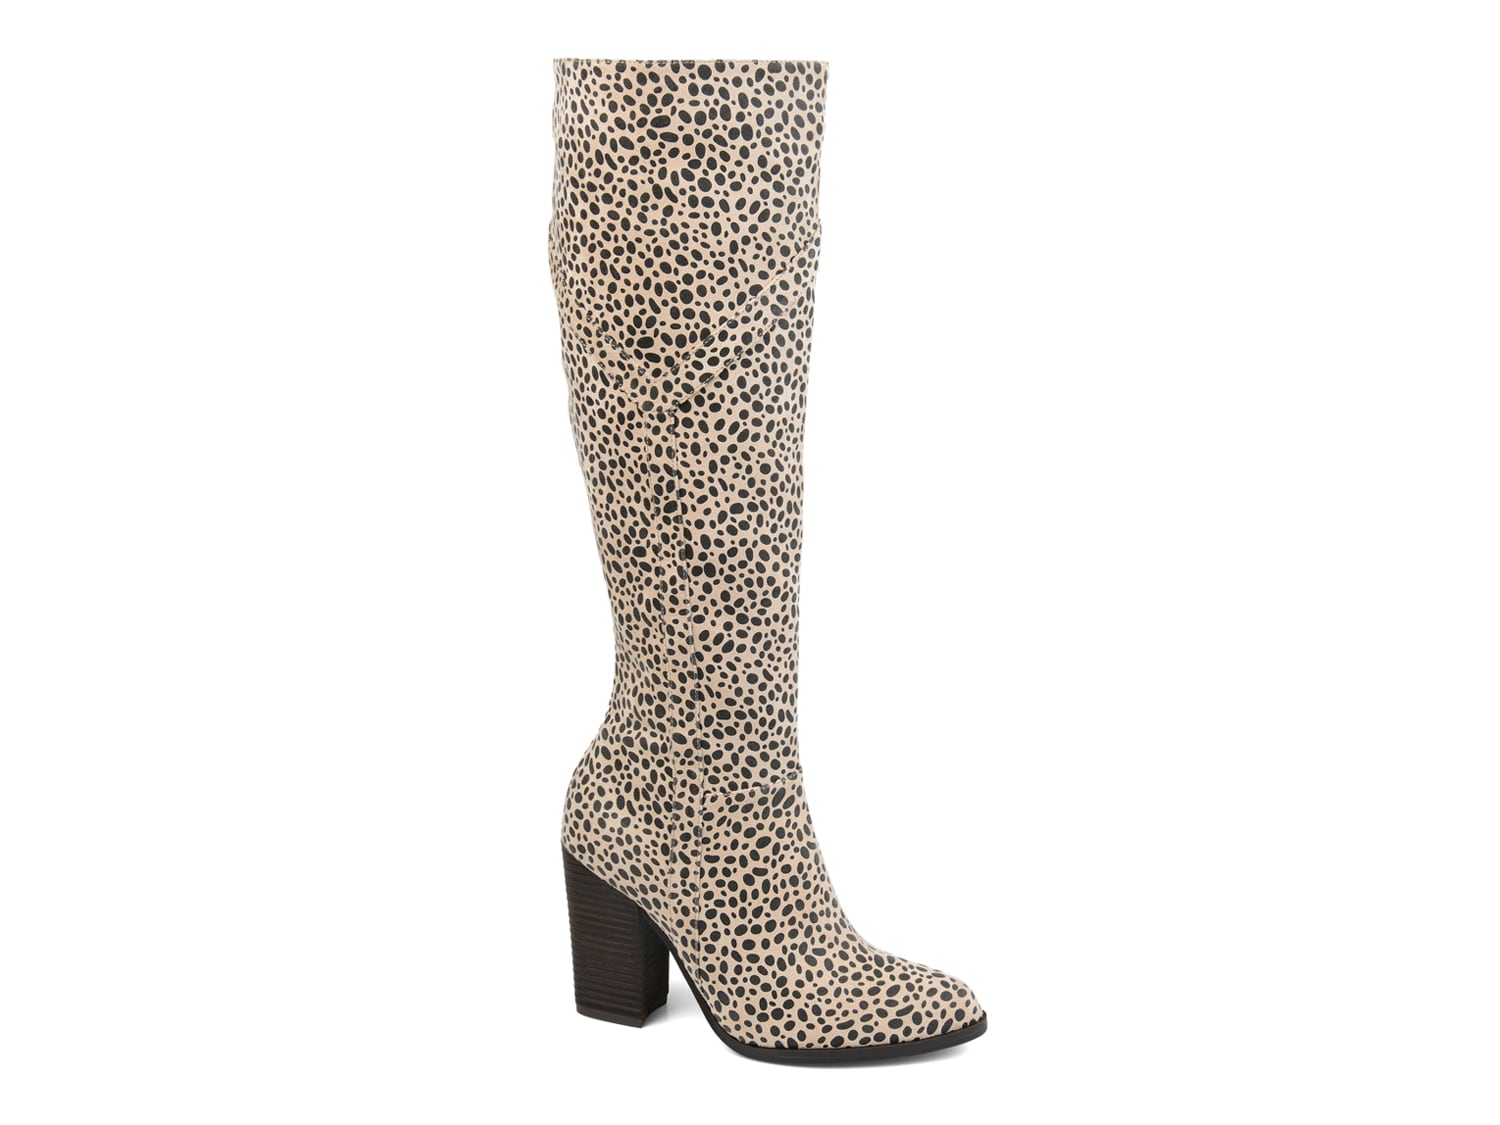 black and leopard print boots